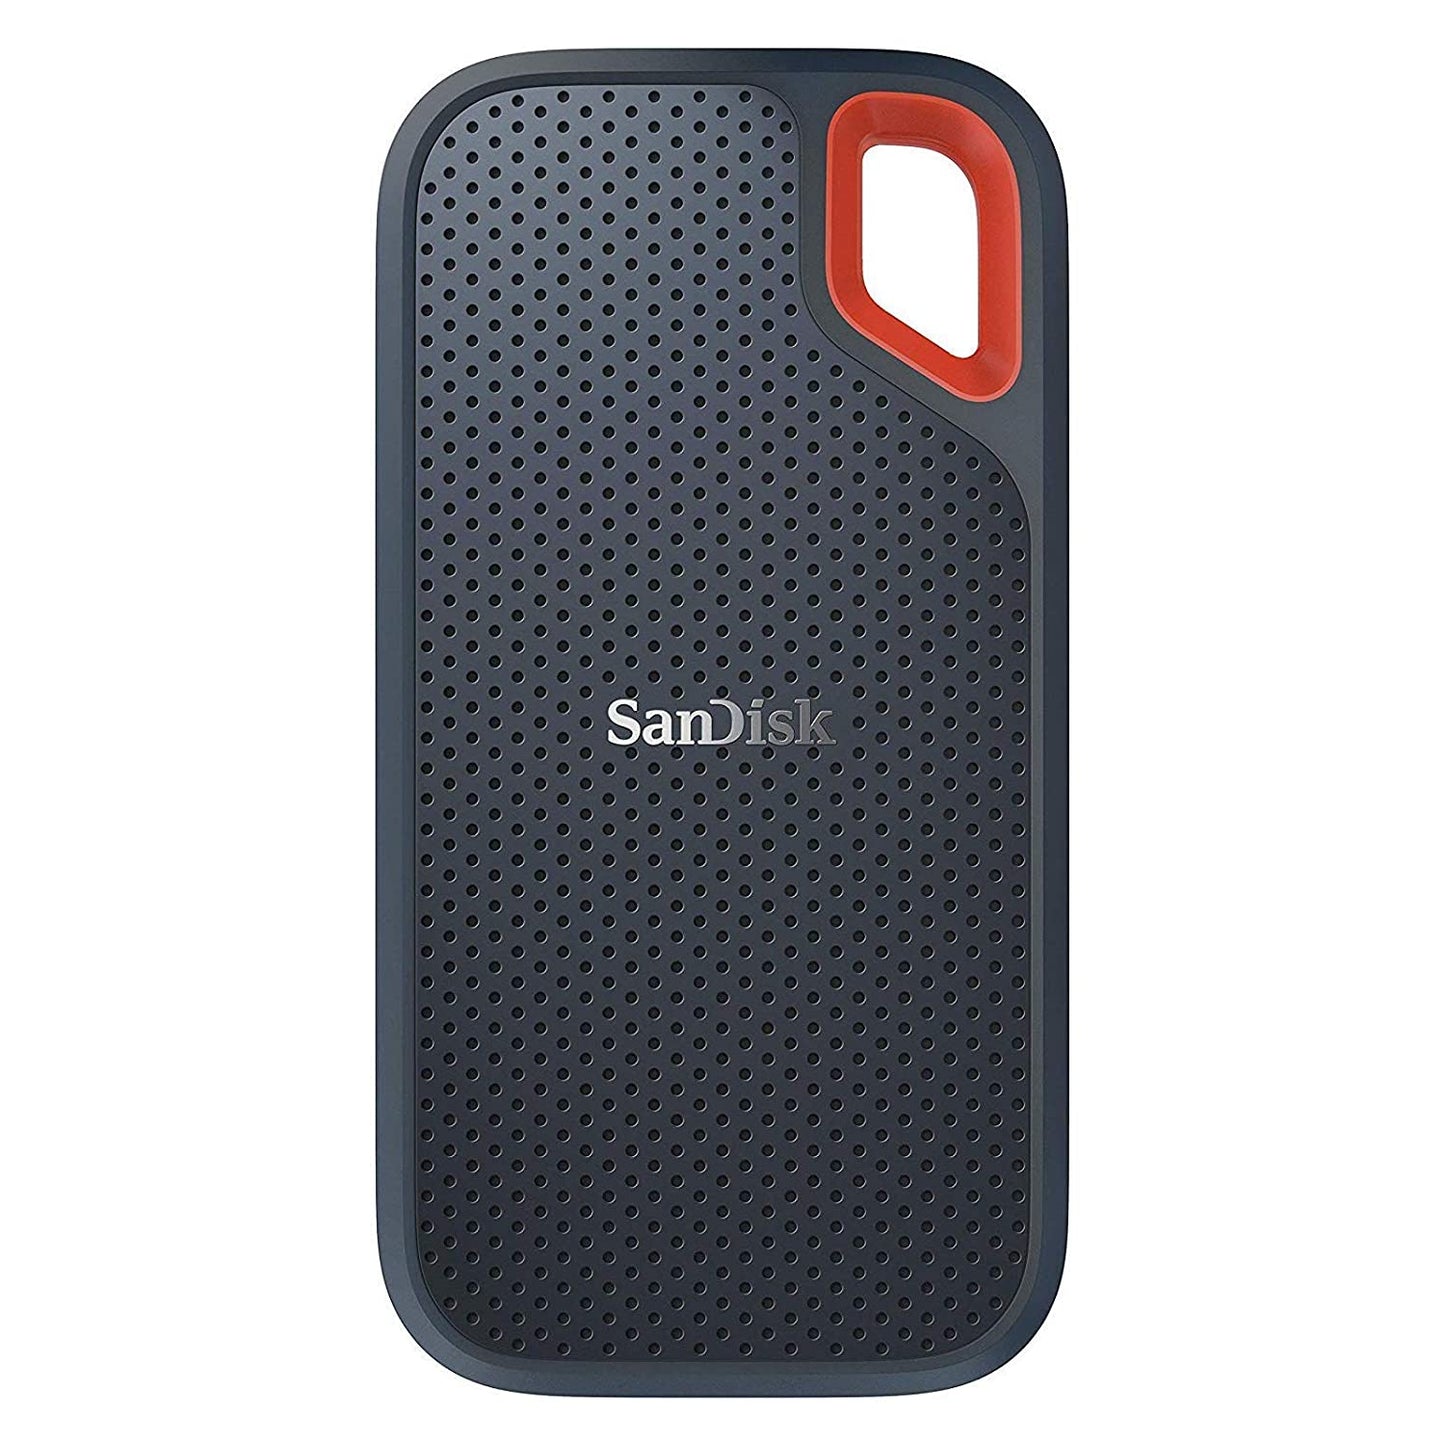 SanDisk 1TB Extreme Portable SSD 1050MB/s R, 1000MB/s W, IP55 Rated, PC, MAC & Smartphone